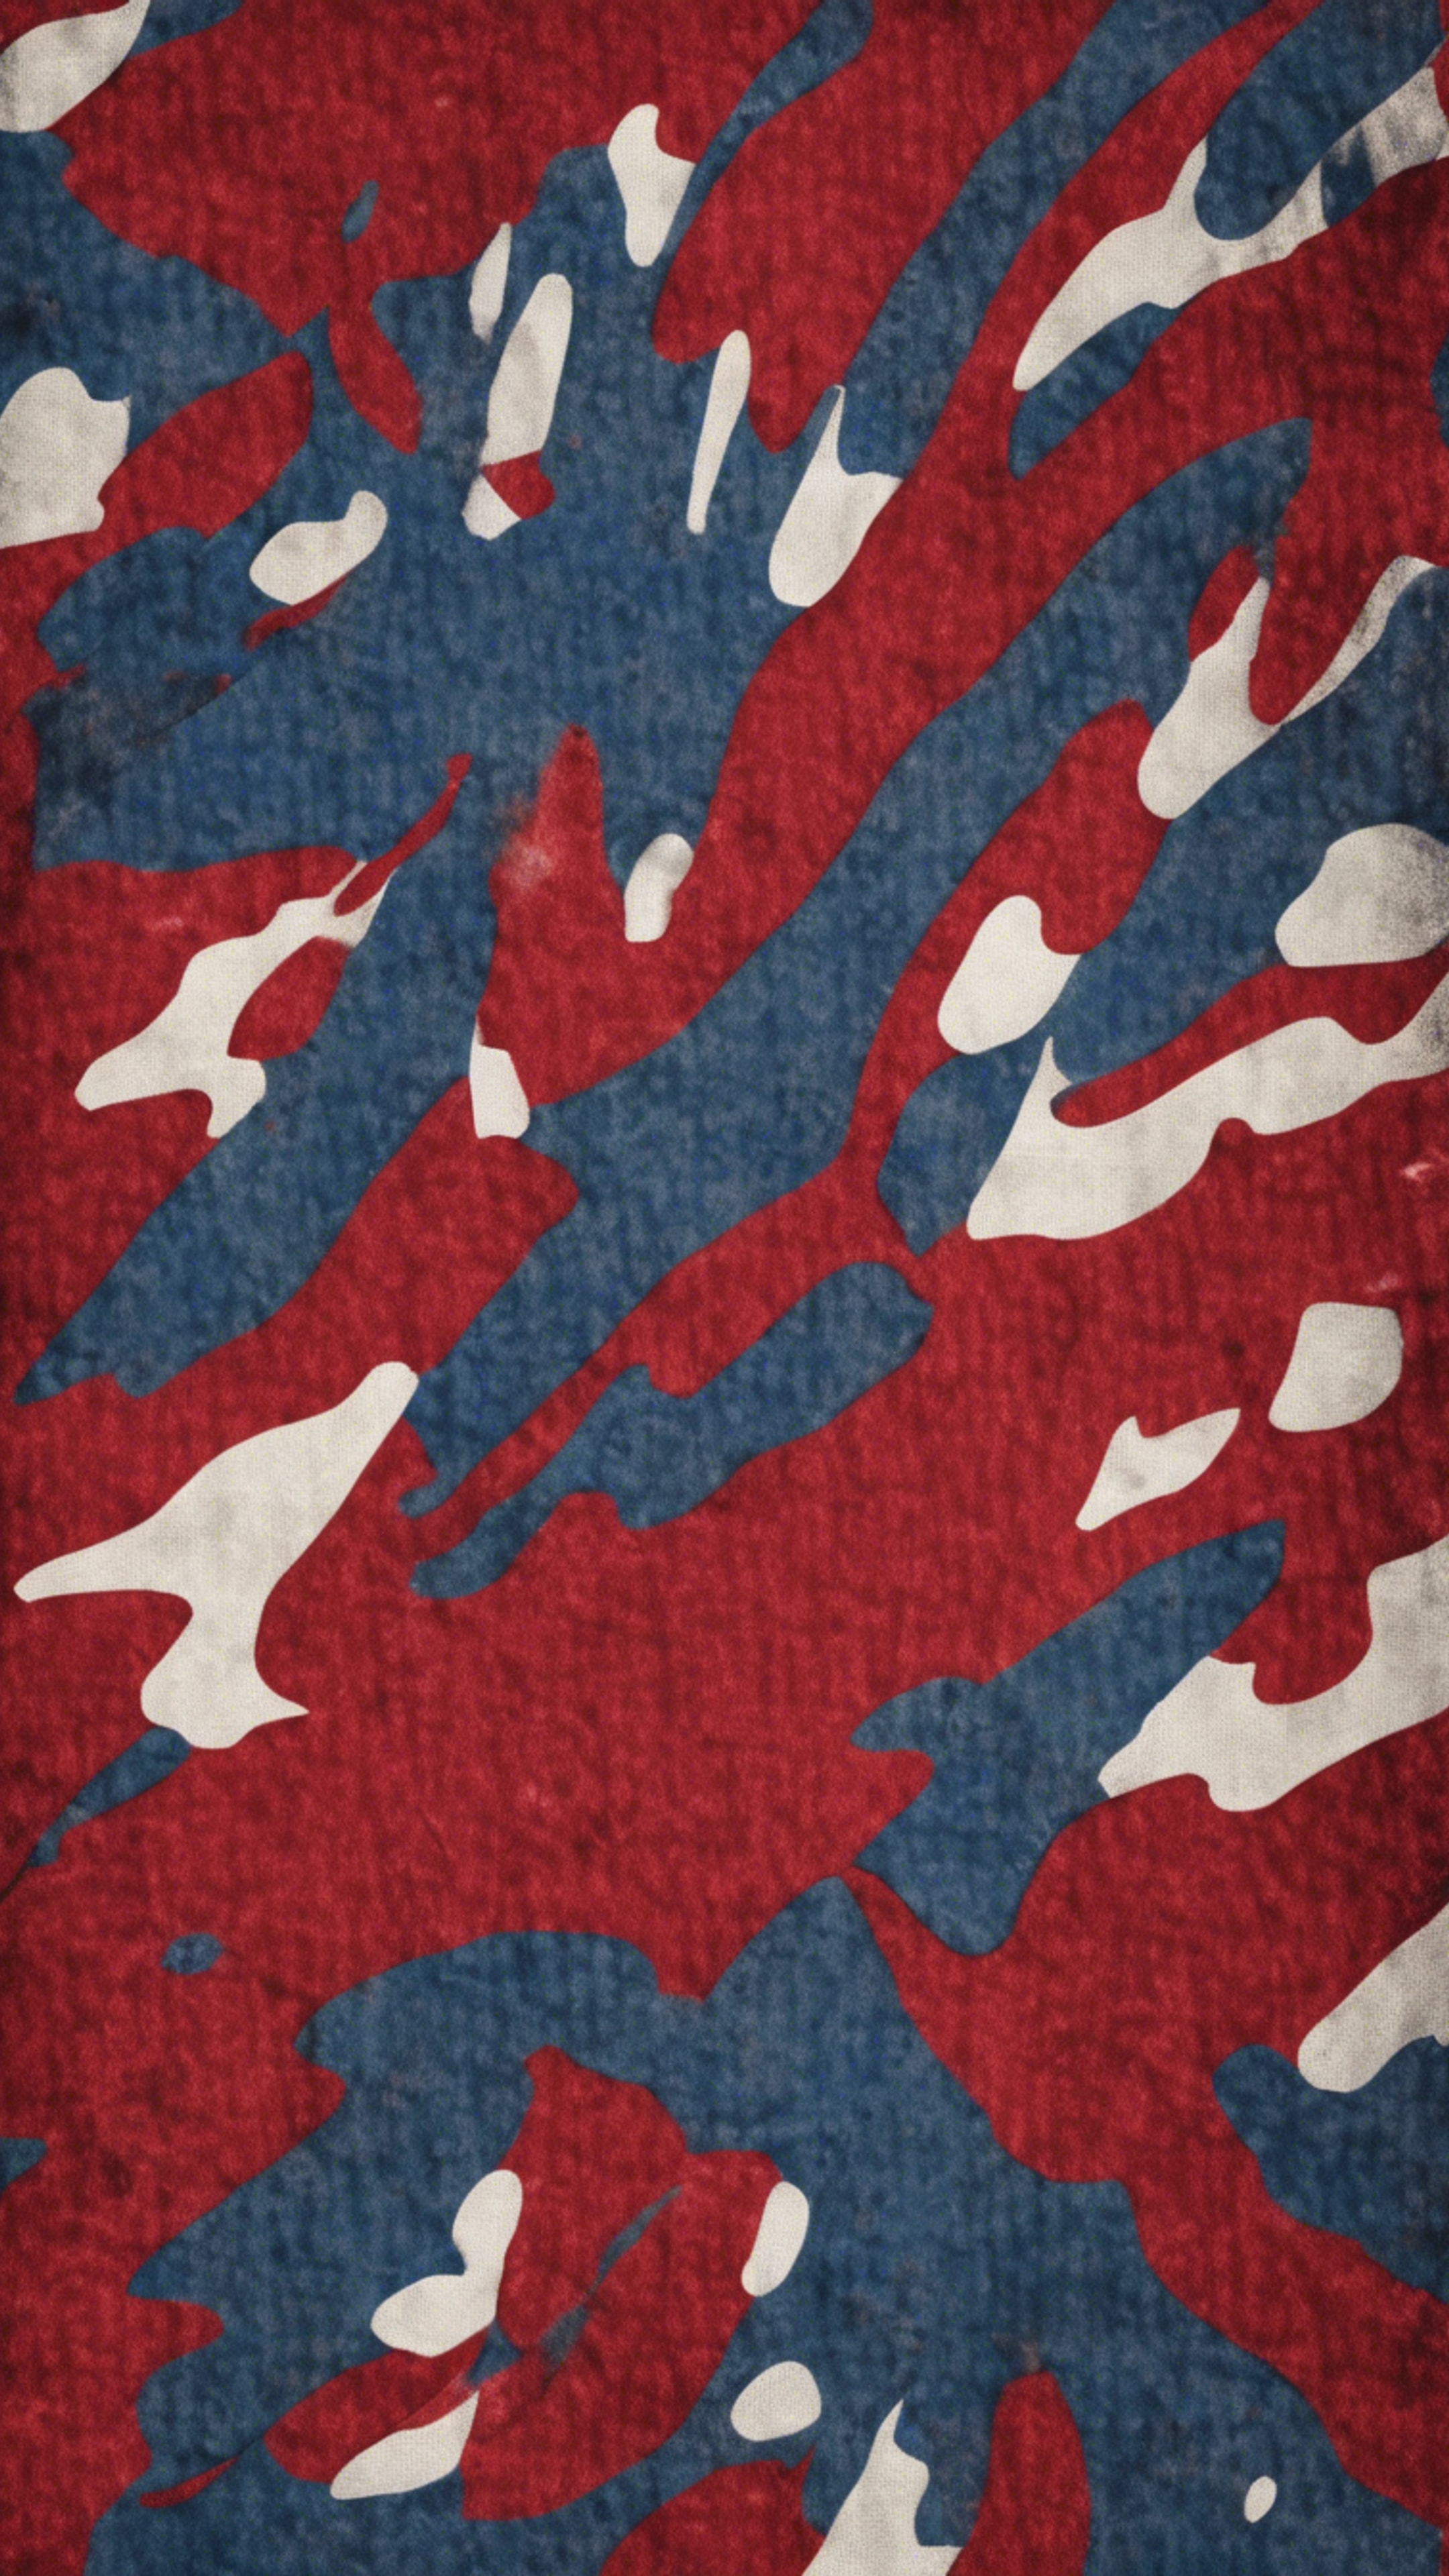 Red and blue camouflage pattern used in navy uniforms. Papel de parede[01ccfb252ca748fab57f]